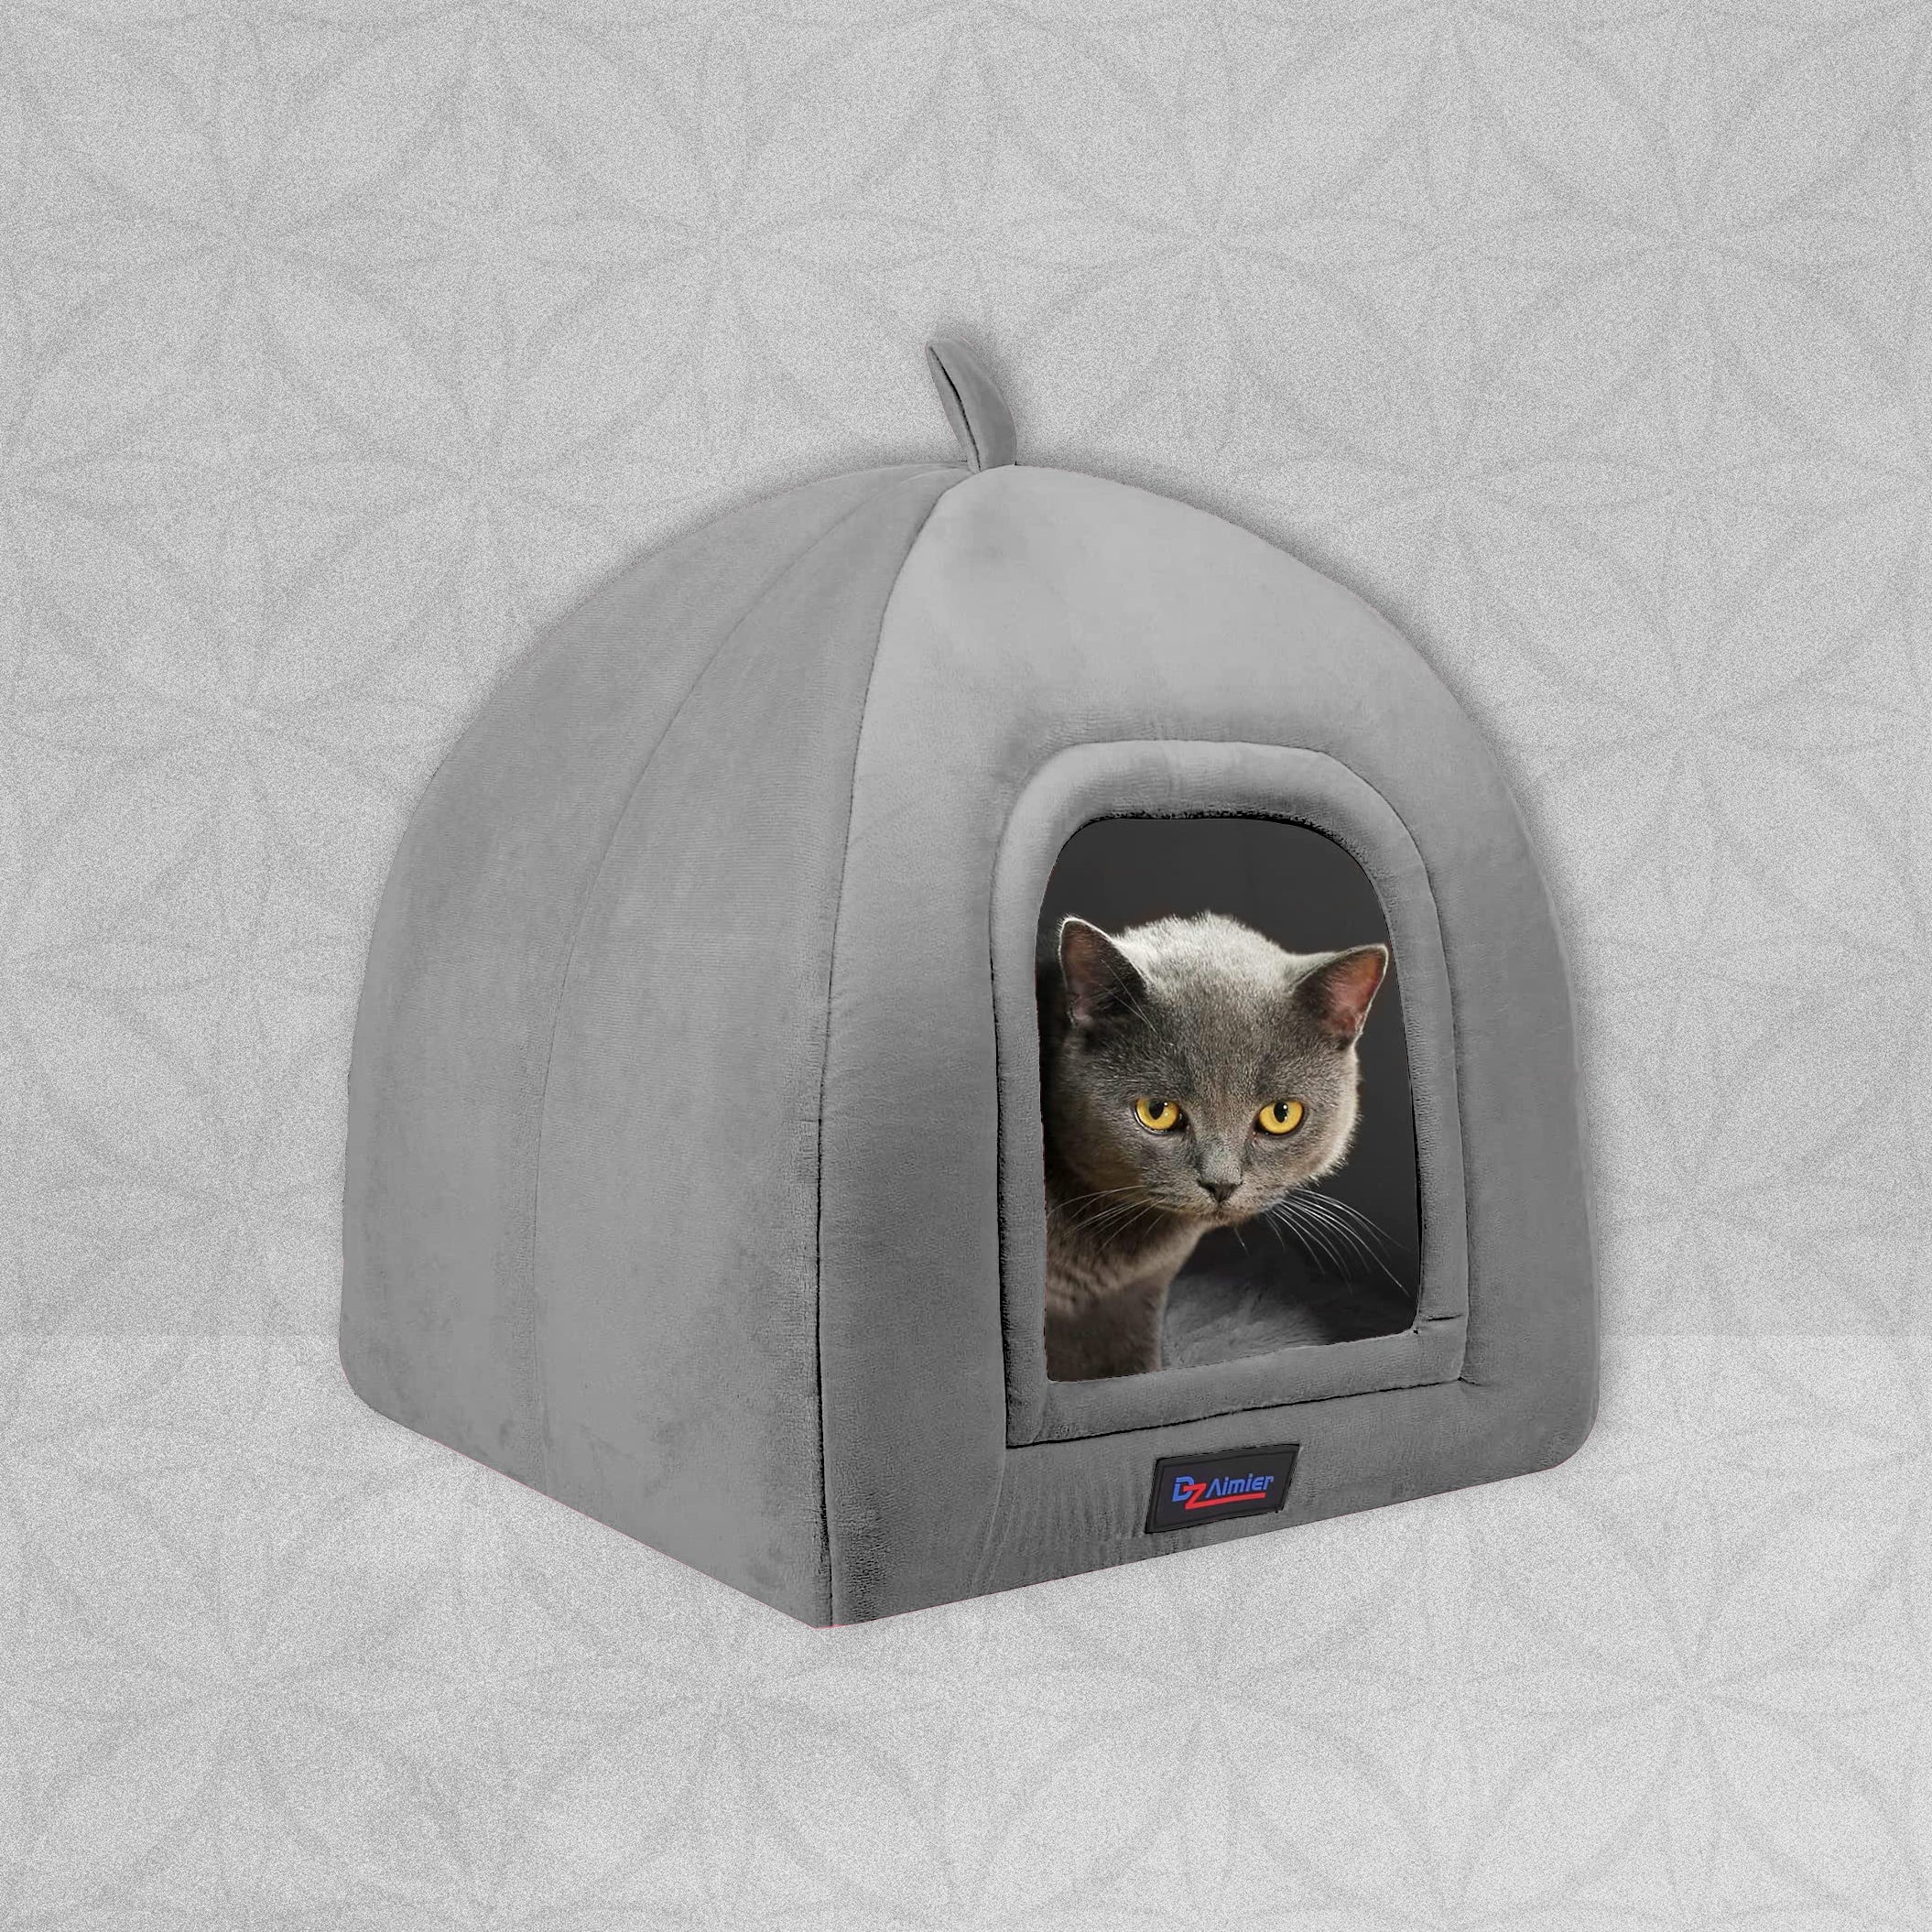 DZ Aimier Indoor Cat Bed - Pet Bed with Removable Washable Cushion - Cat Cave / Cat Tent - Small or Medium Grey